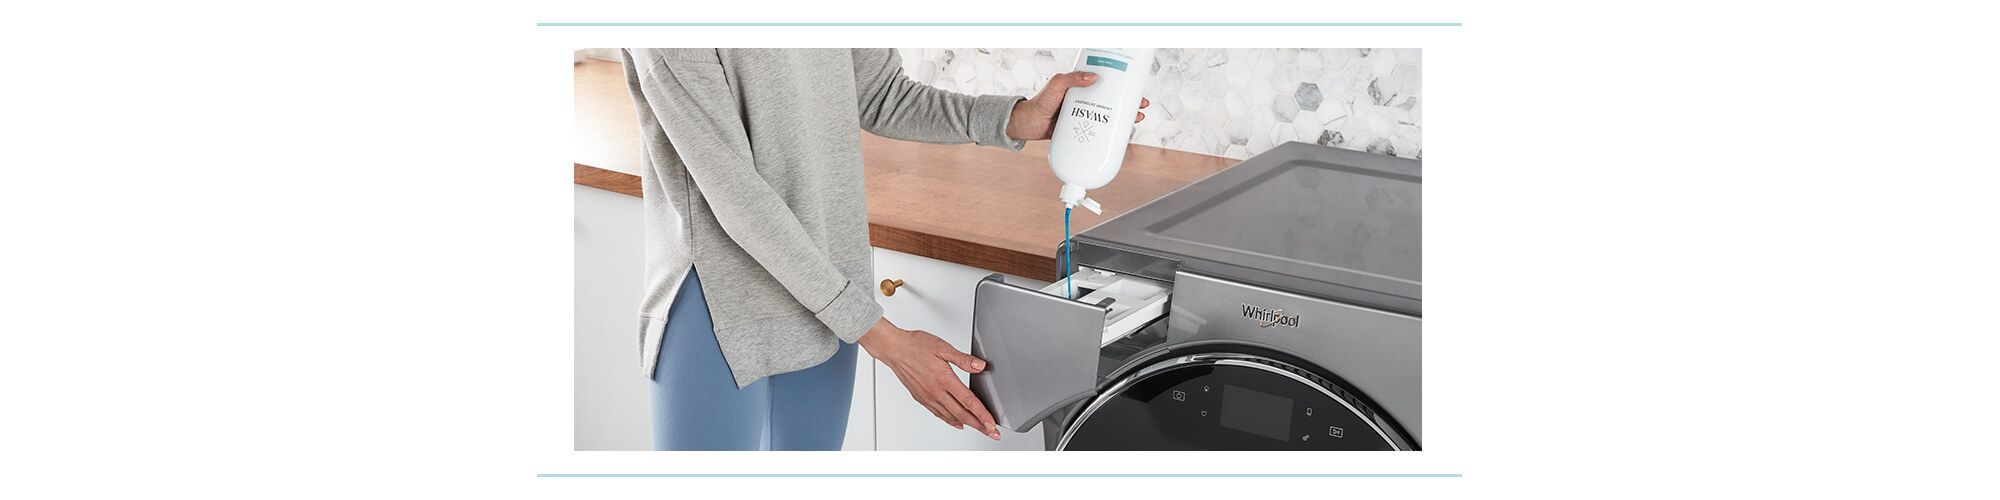 Woman in a gray sweatshirt dispensing Swash laundry detergent using the Precision Pour Cap into a Whirlpool washing machine